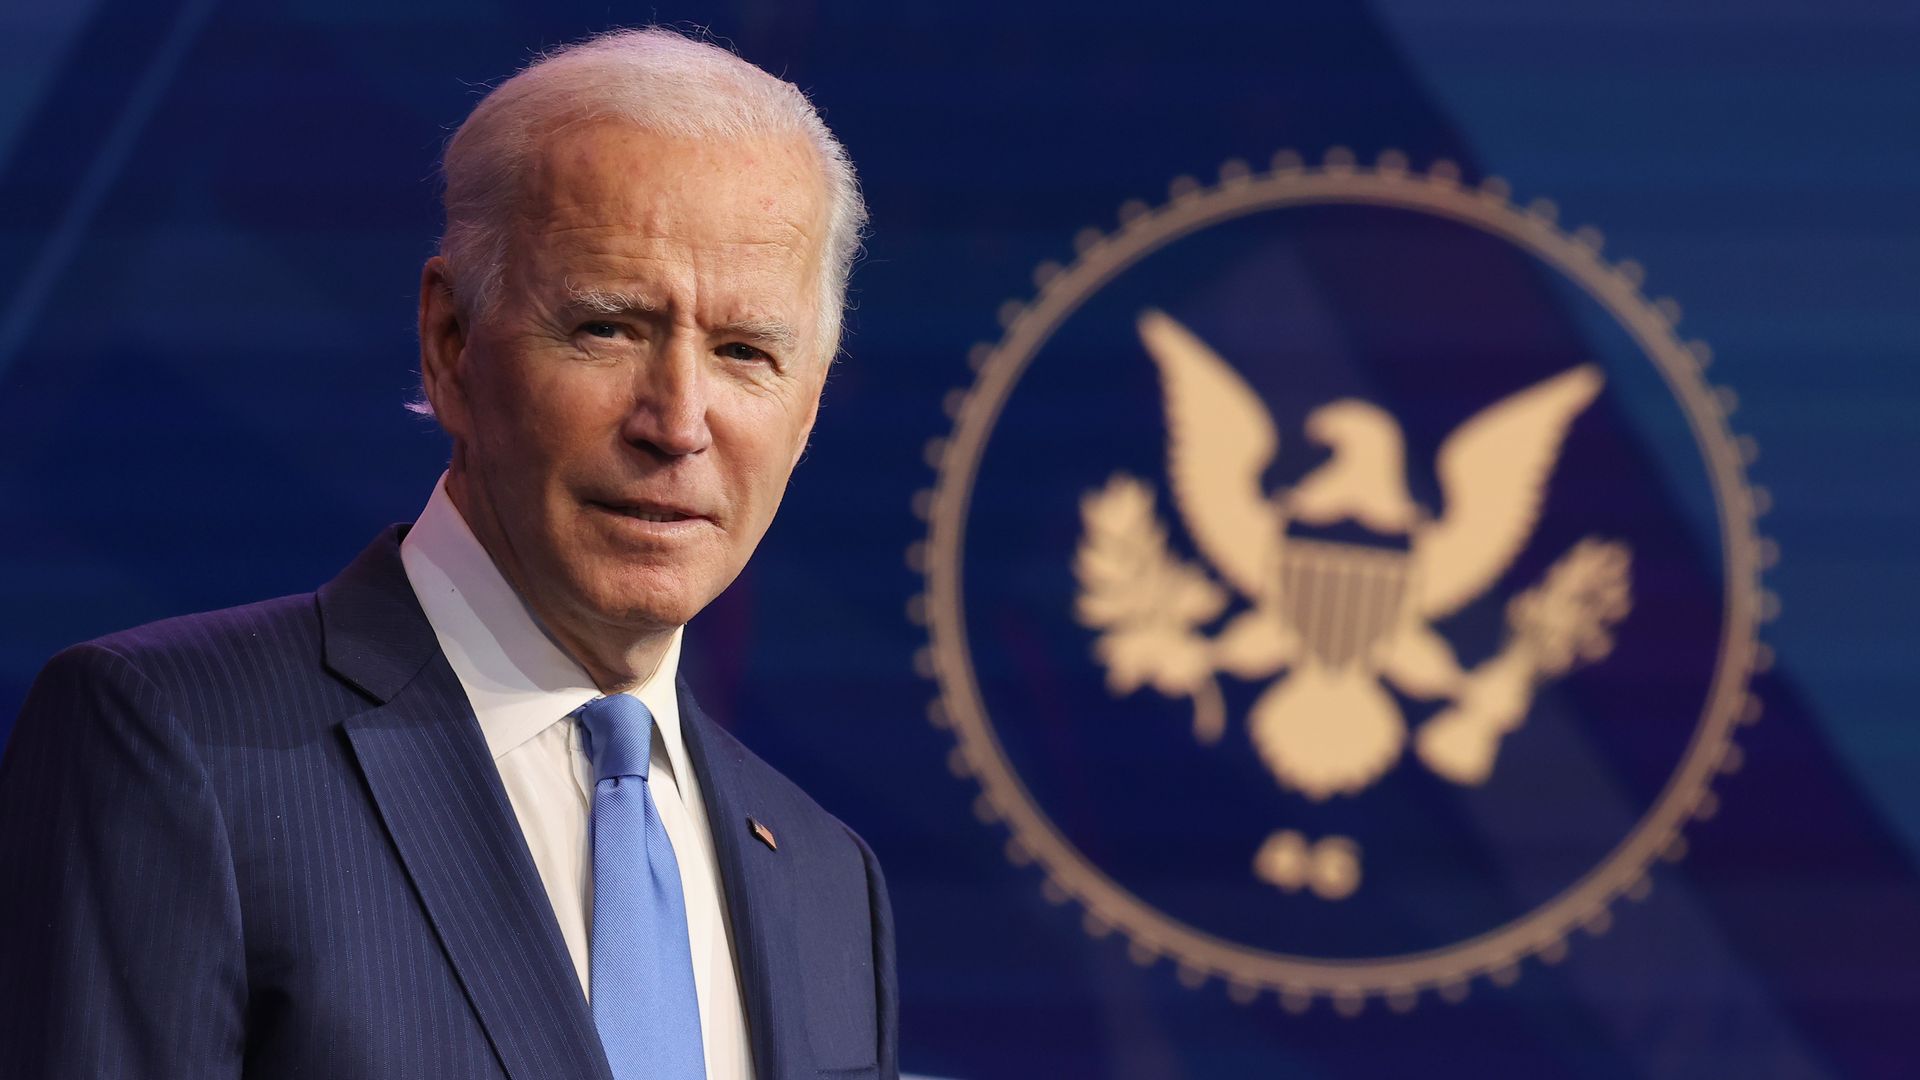  President-elect Joe Biden speaks during an event to announce new cabinet nominations at the Queen Theatre on December 11, 2020 in Wilmington, Delaware. 